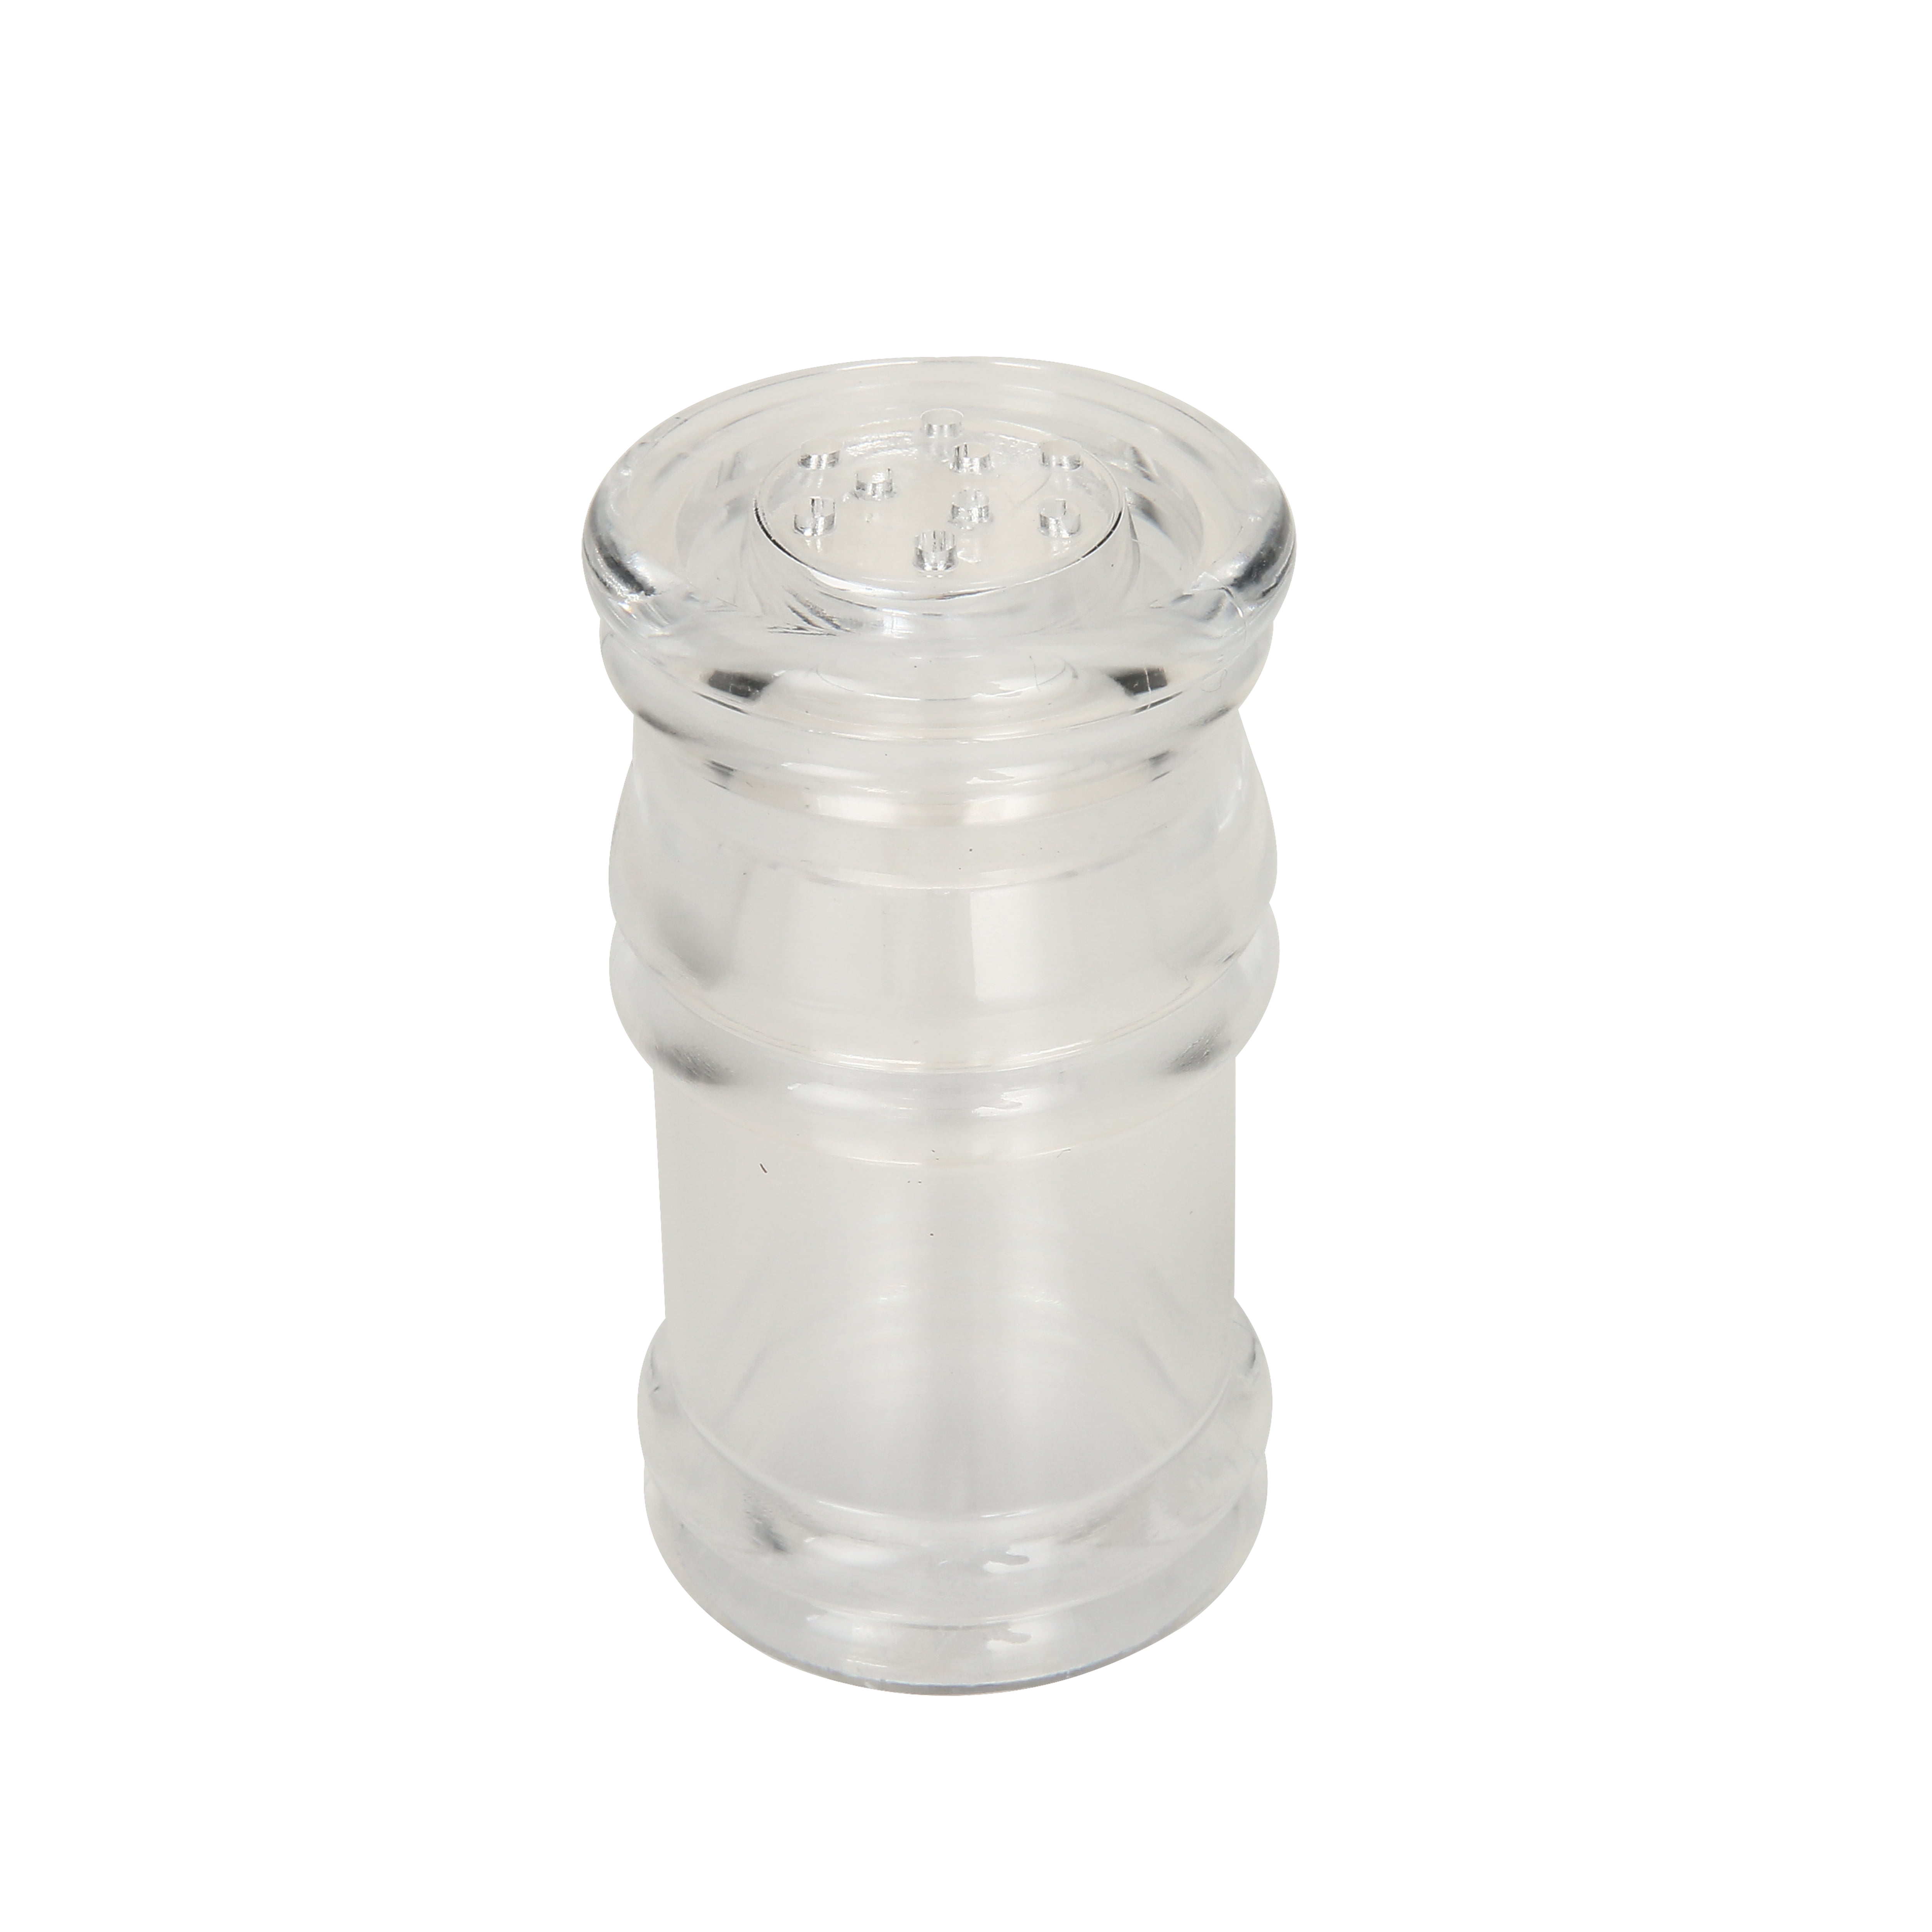 Mainstays Salt and Pepper Shaker, Clear Durable Plastic